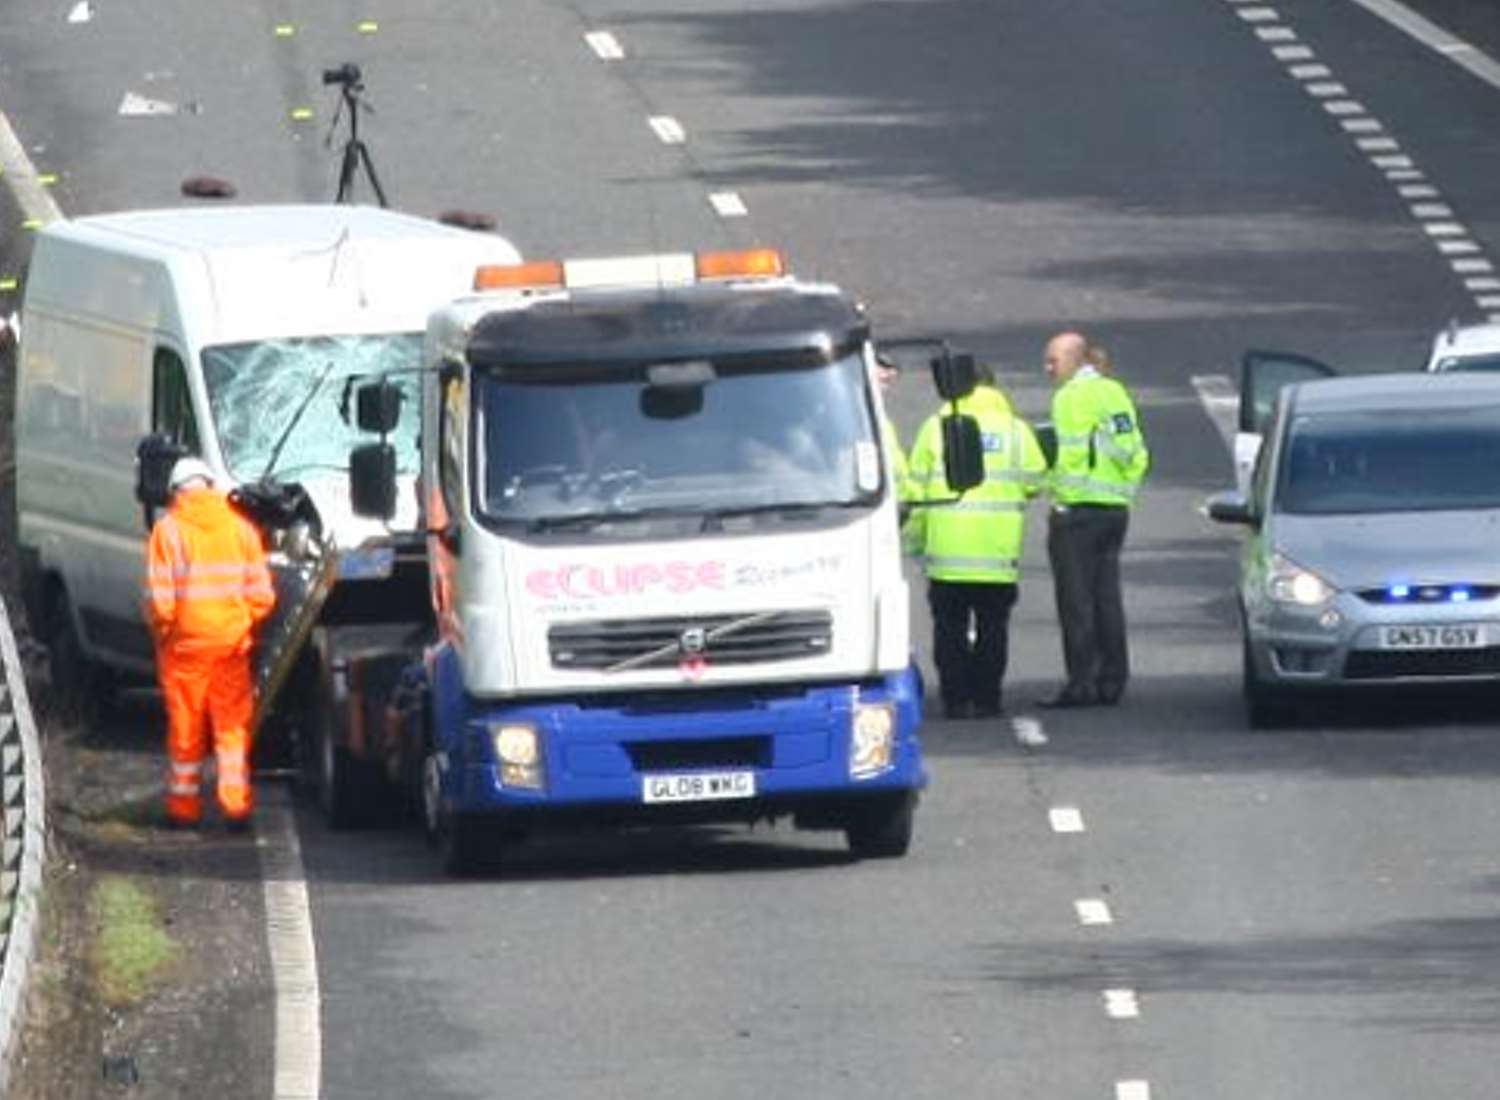 A pedestrian is thought to have been hit by a van on the A2